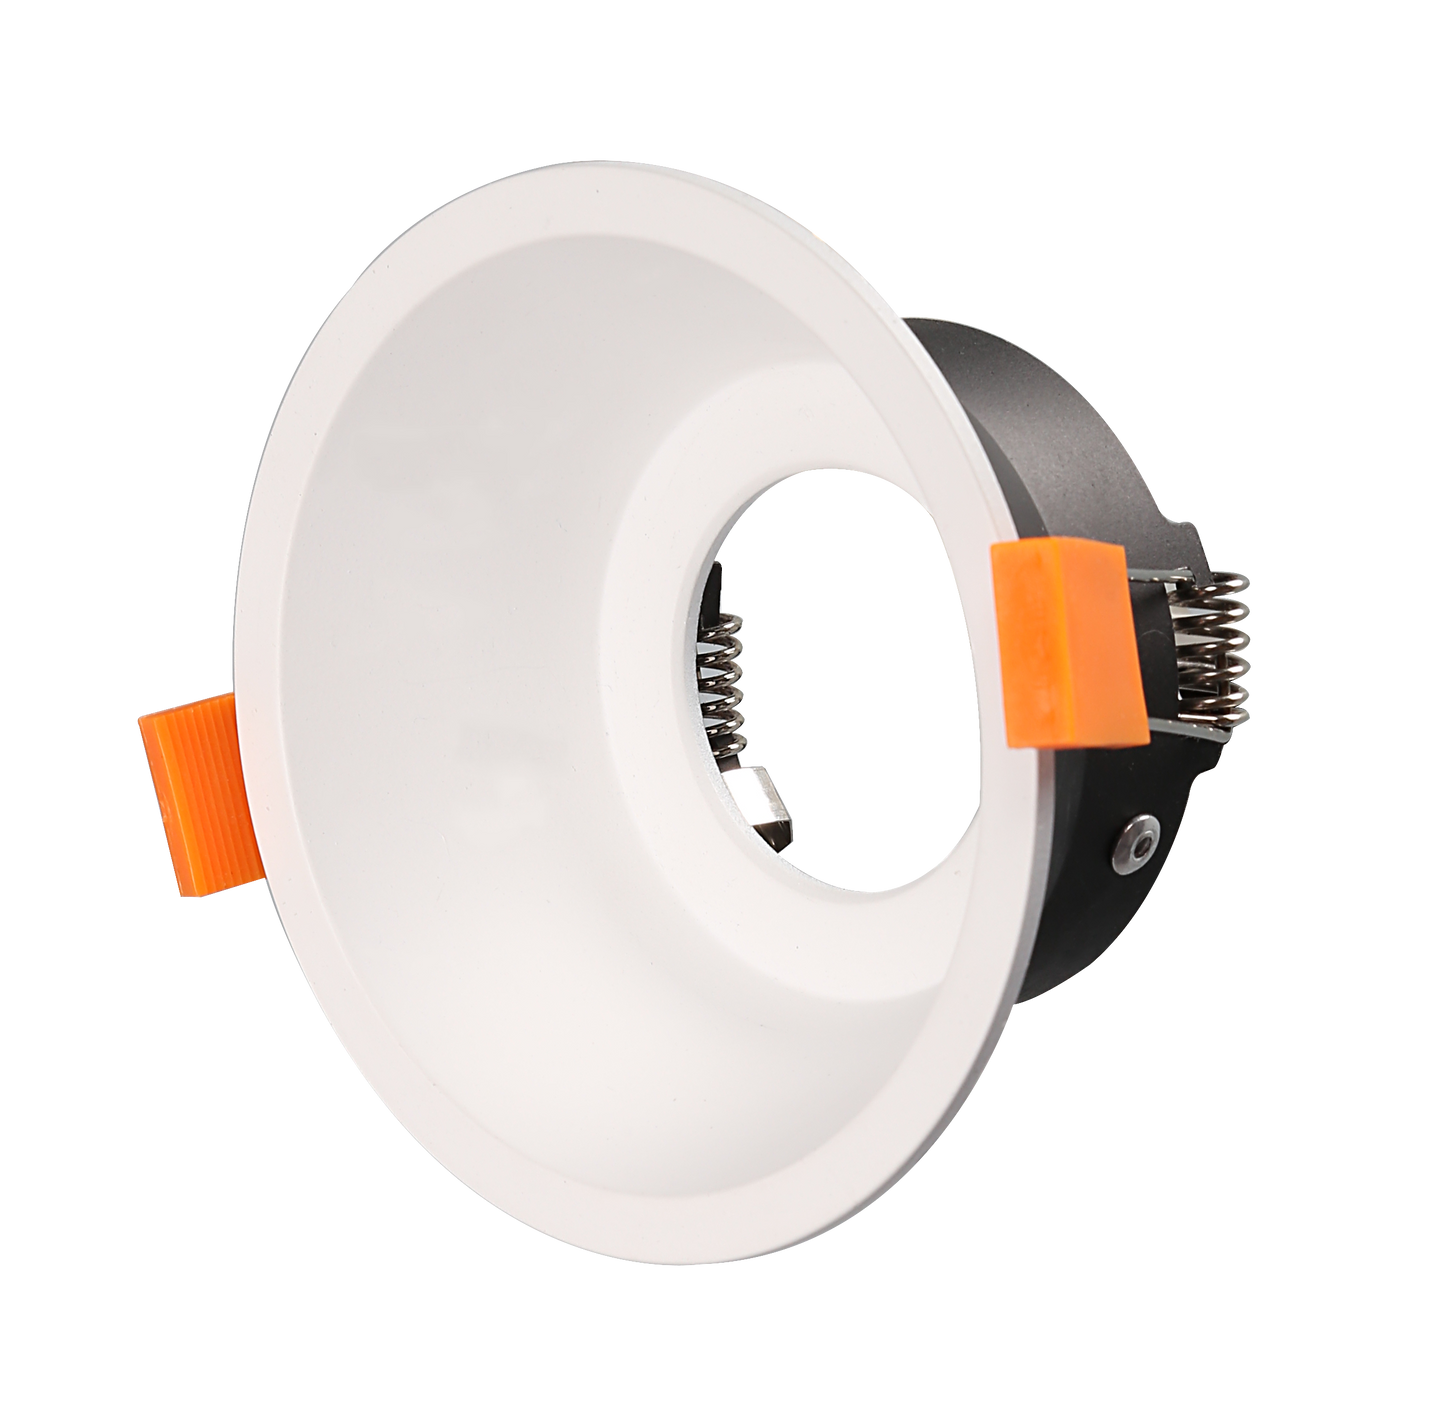 RF2 White-Round fixed IP20 surface mount trim for X Series COB Light modules